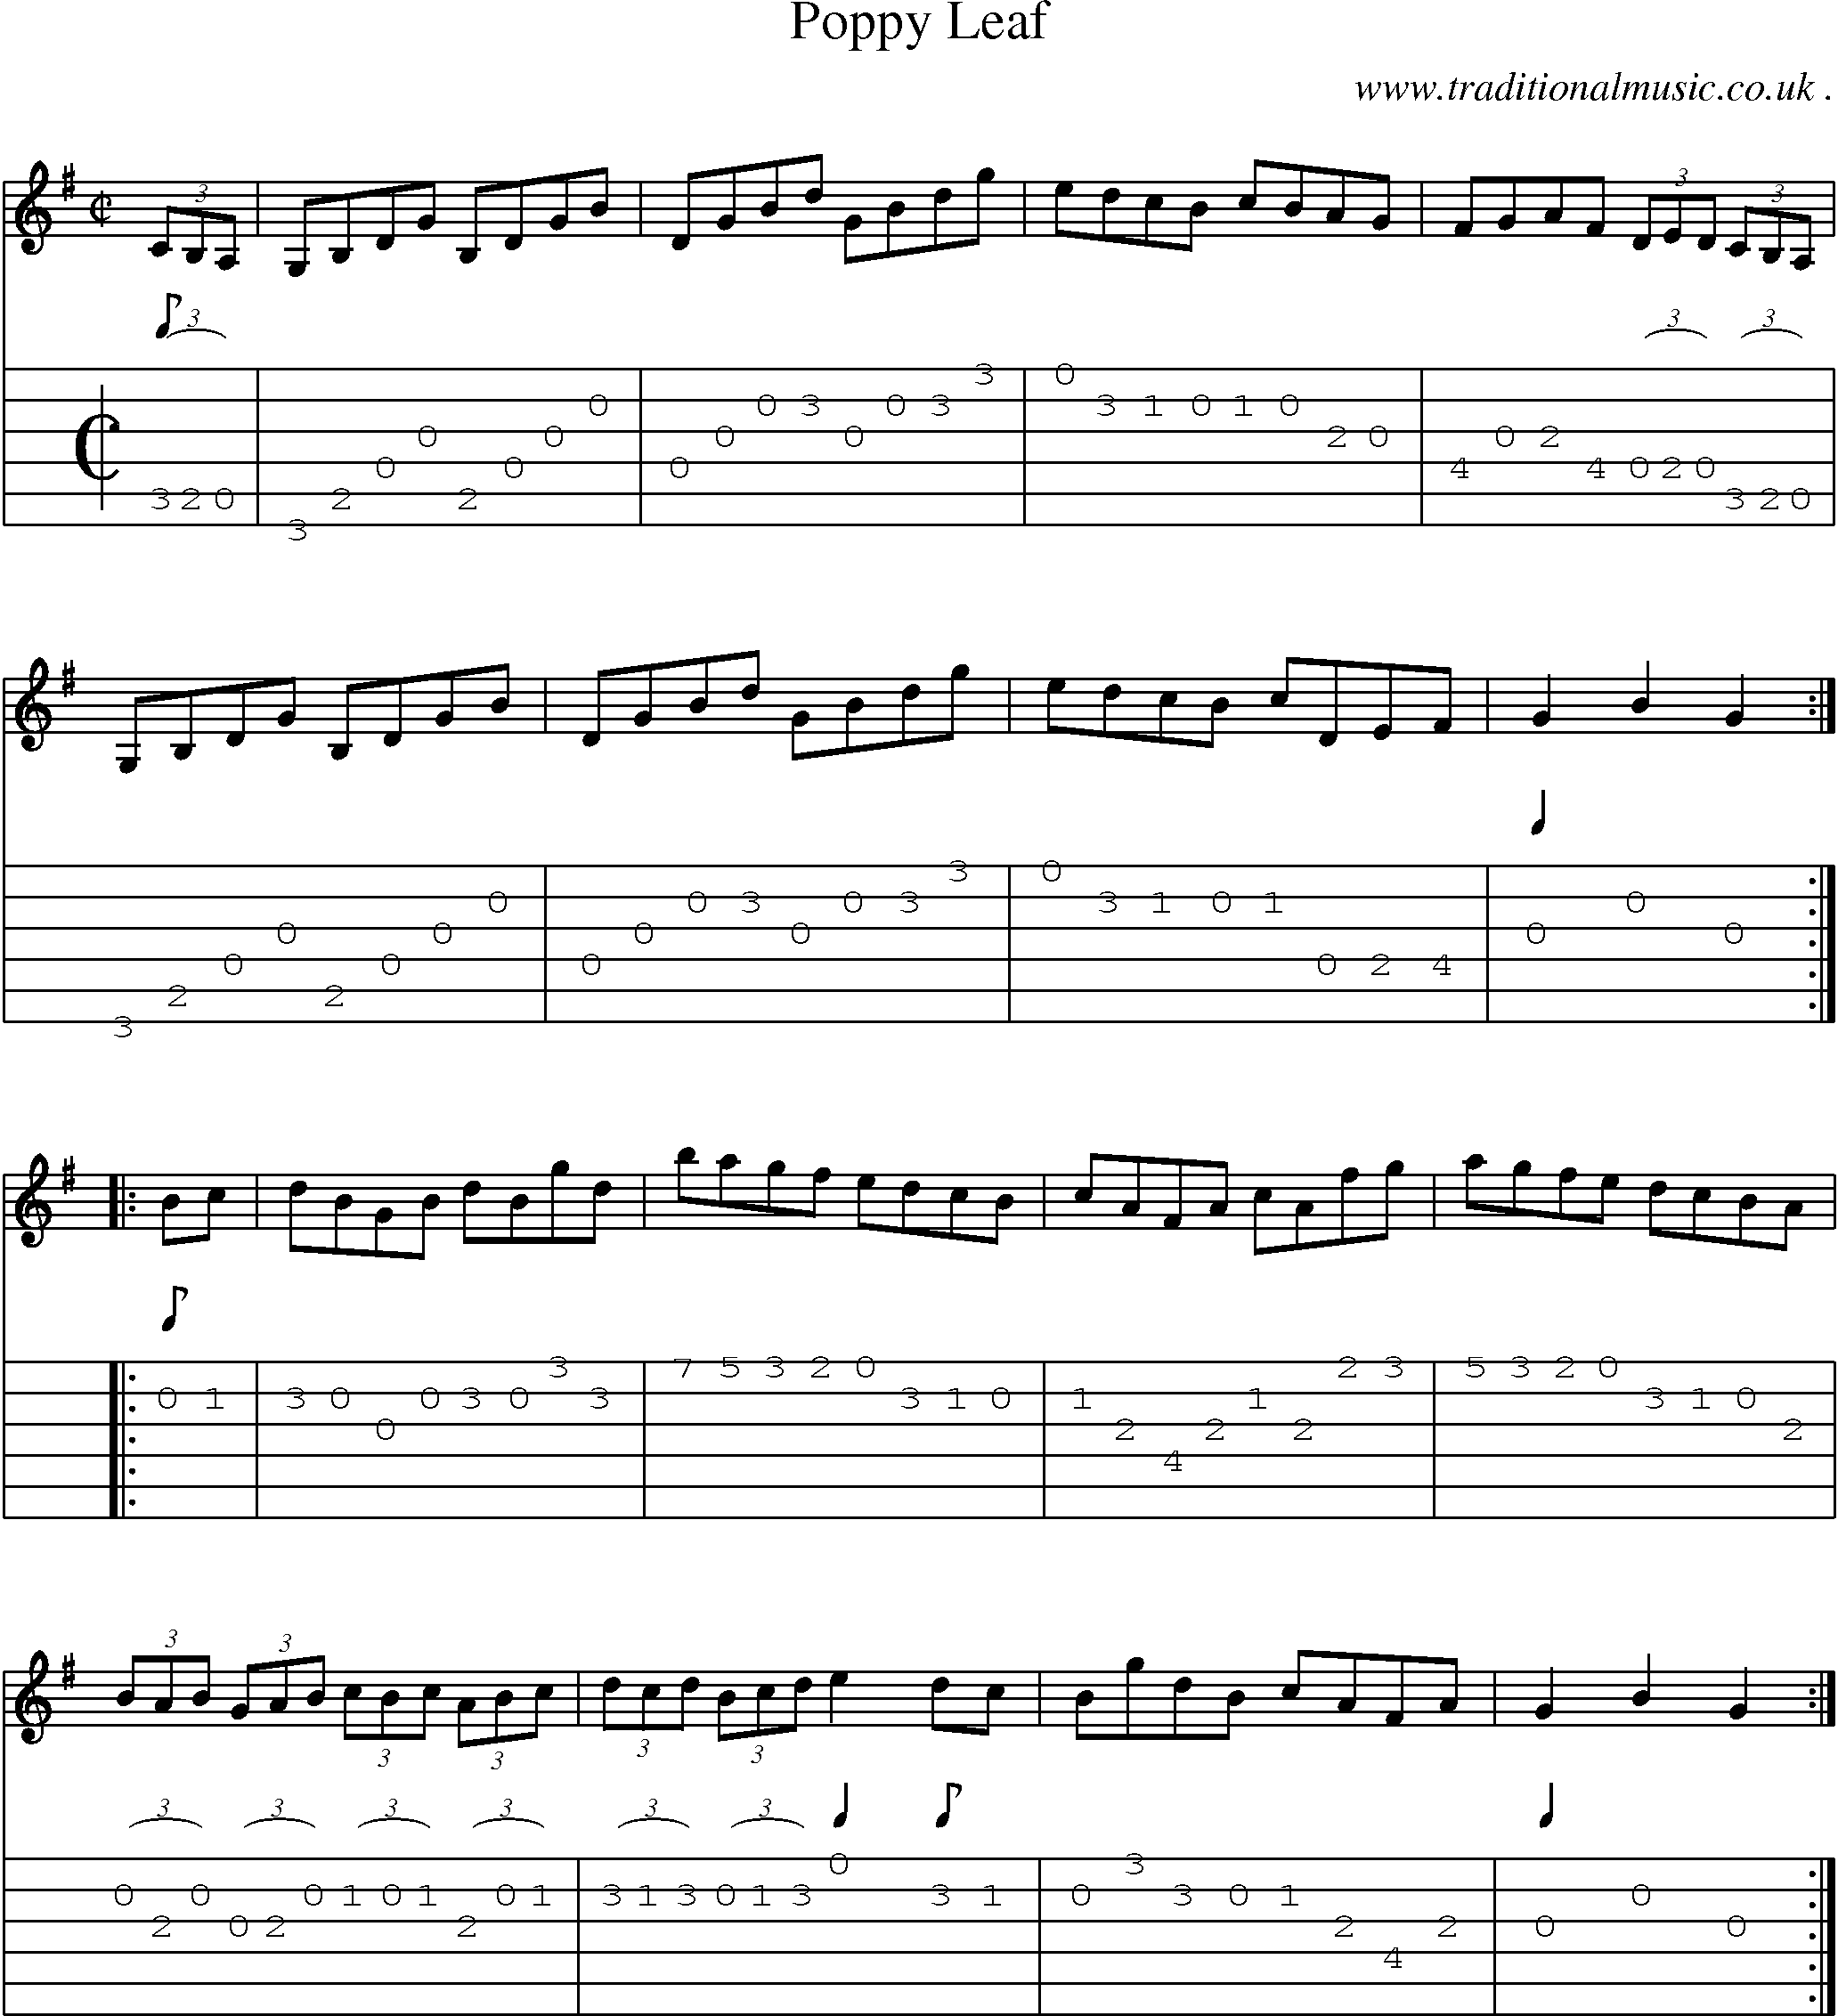 Sheet-Music and Guitar Tabs for Poppy Leaf